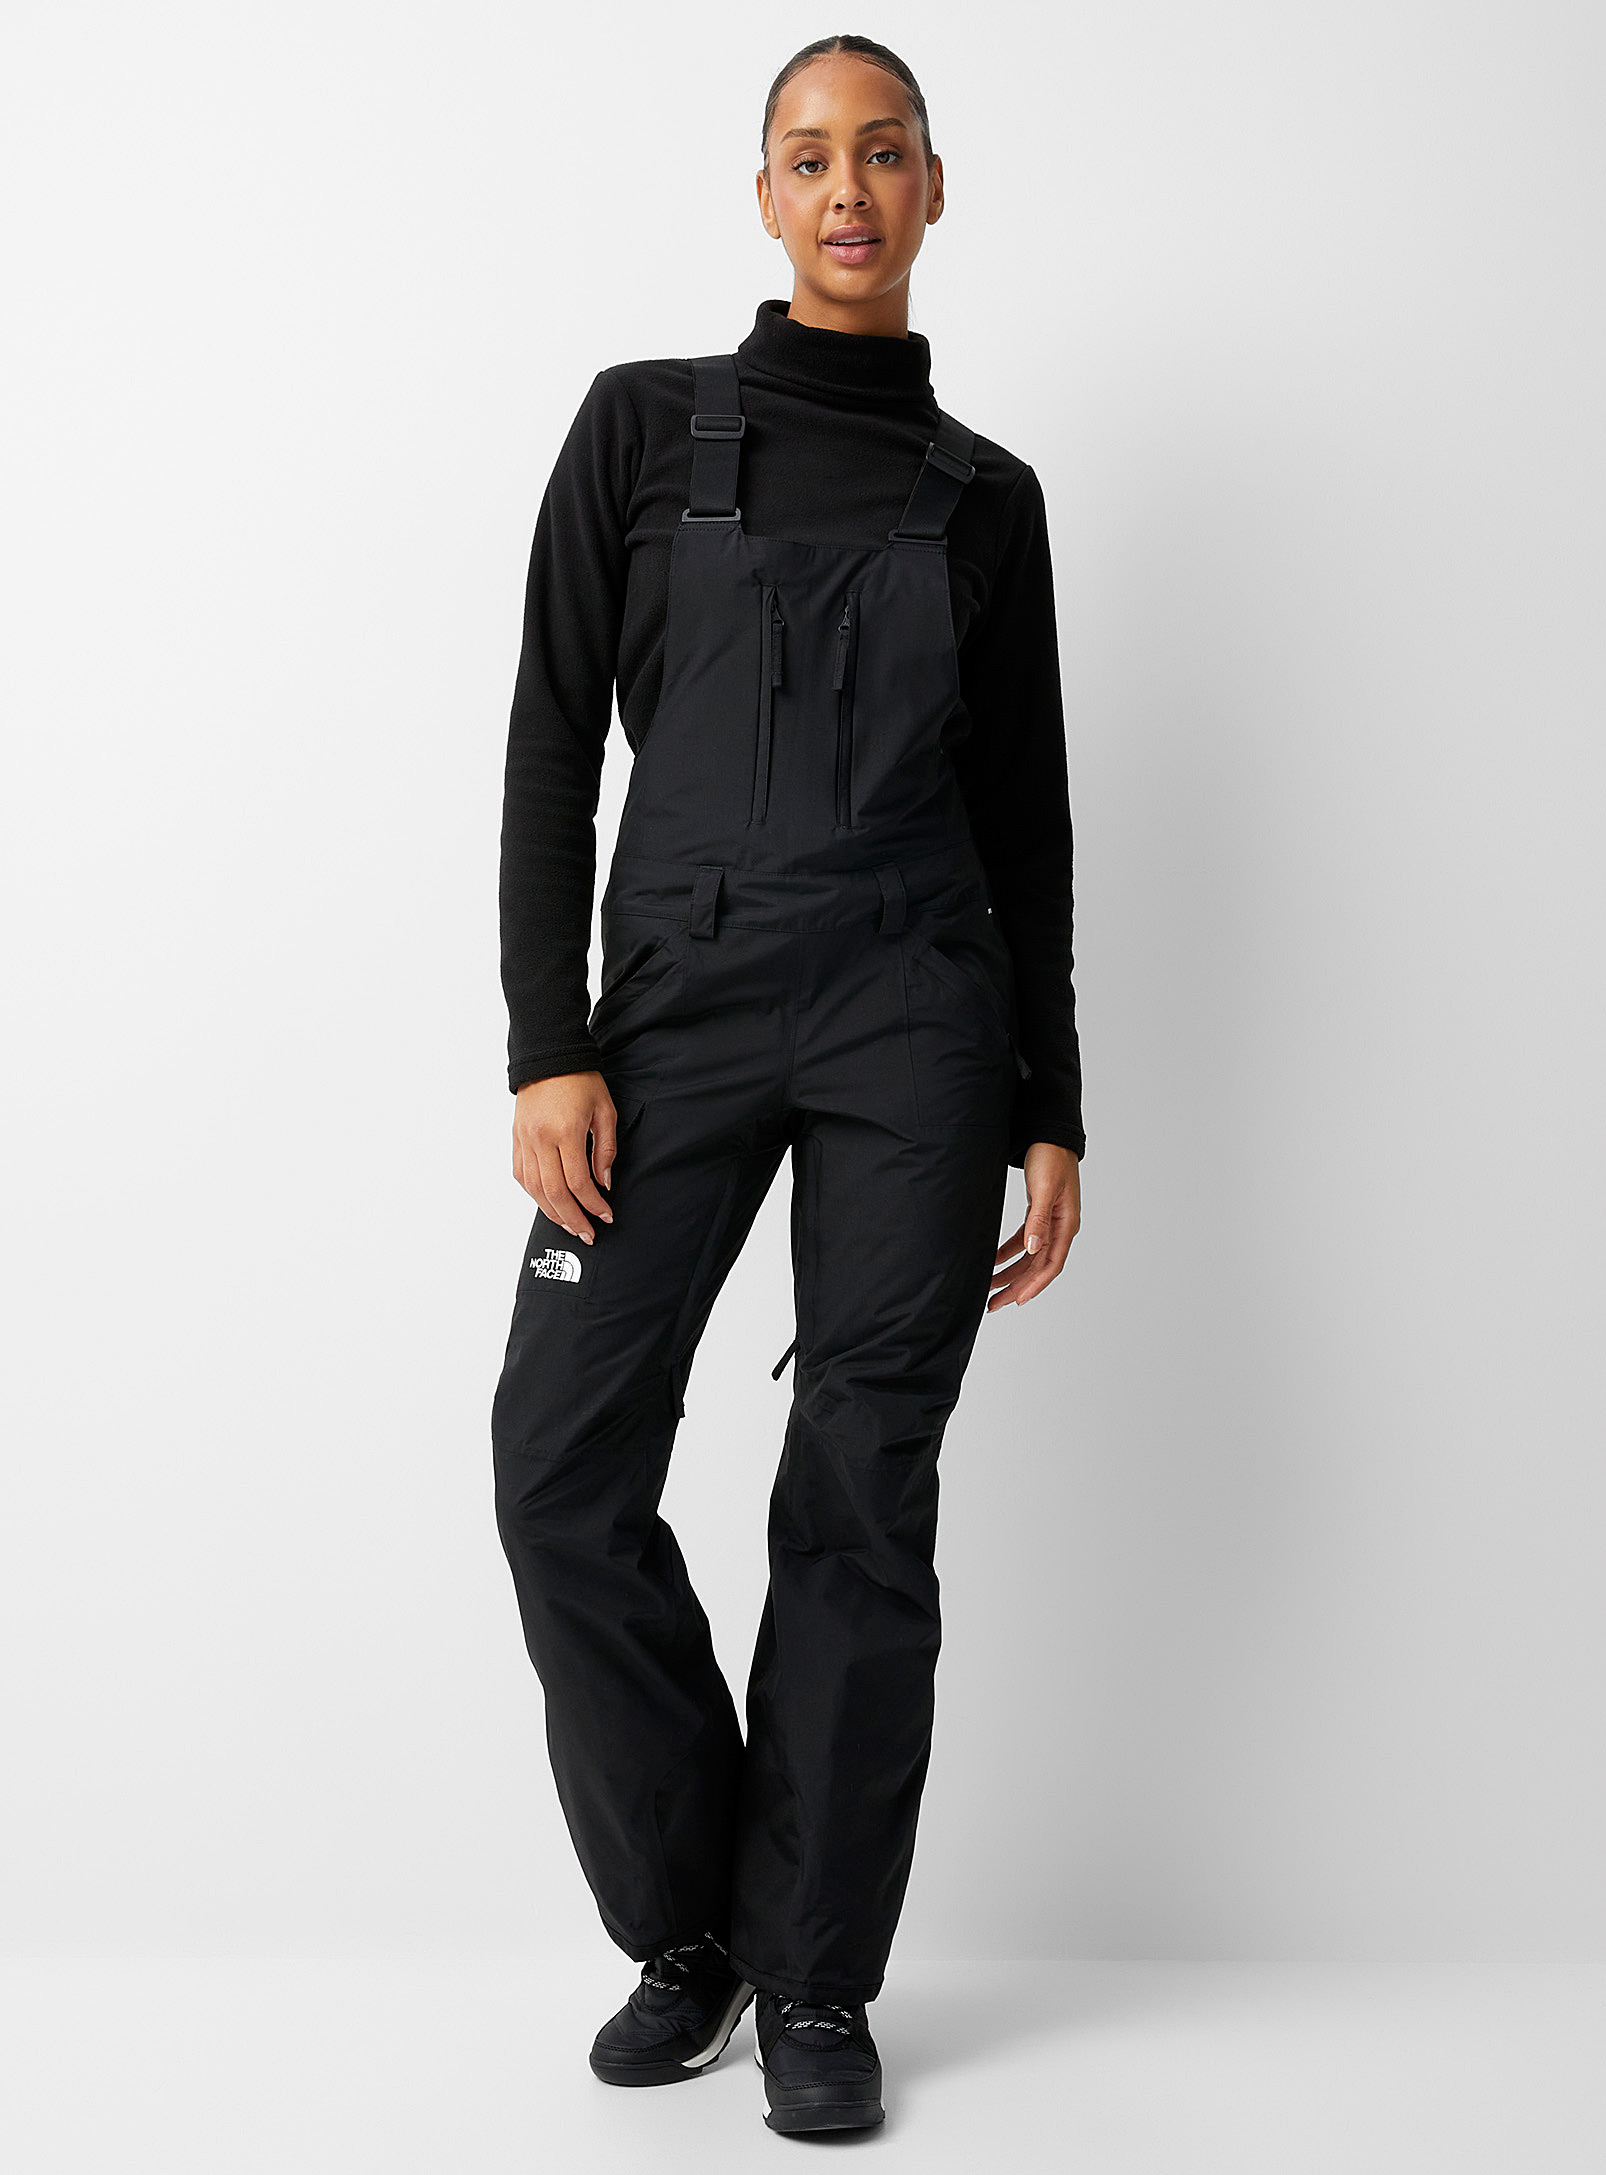 THE NORTH FACE FREEDOM OVERALLS REGULAR FIT